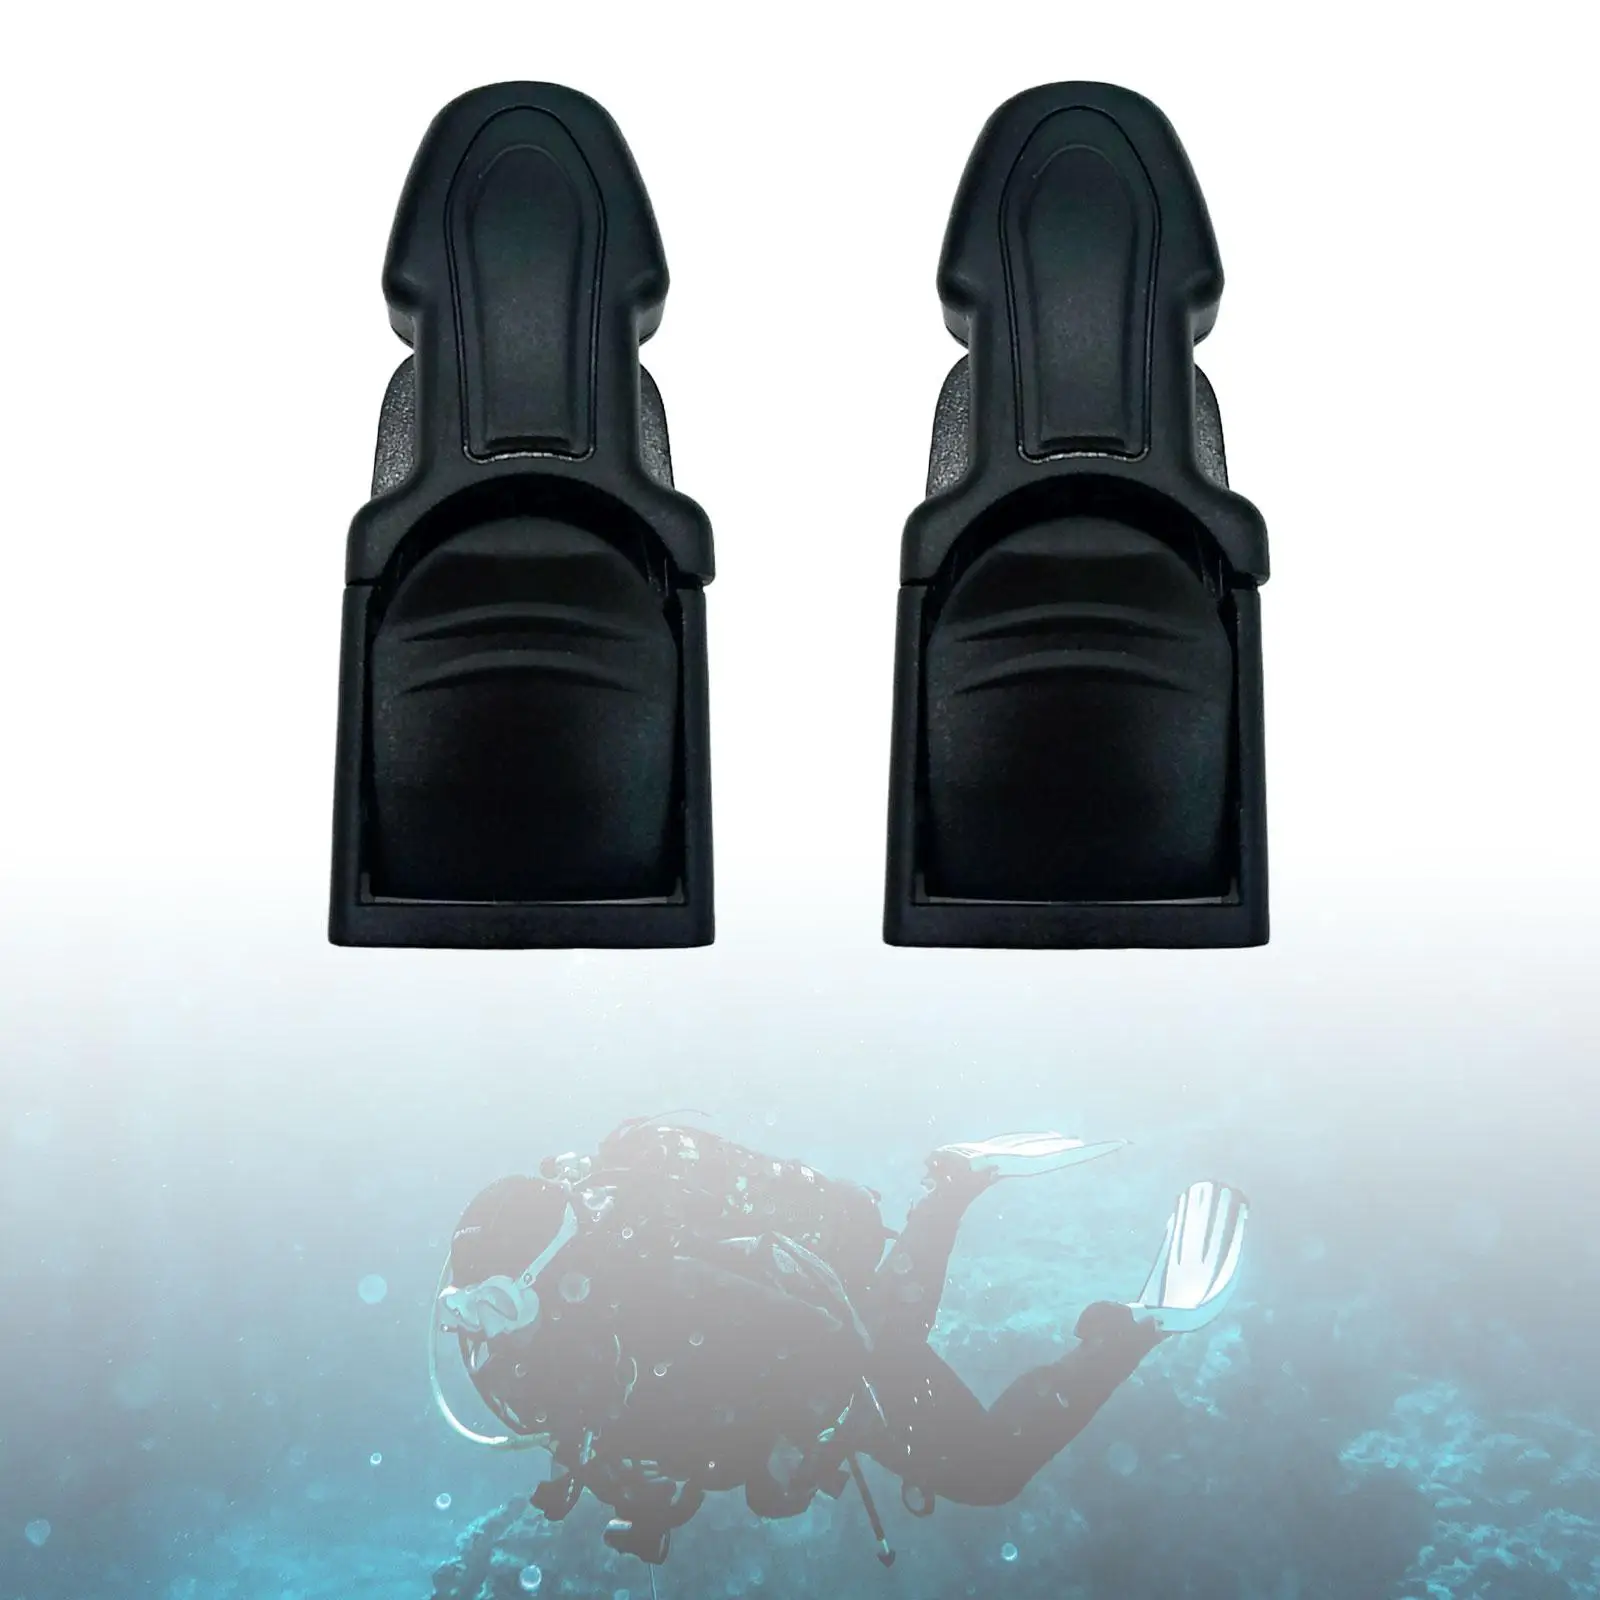 2 Pieces Diving Fin Strap Buckles Adjustable Swimming Fin Flippers Buckles